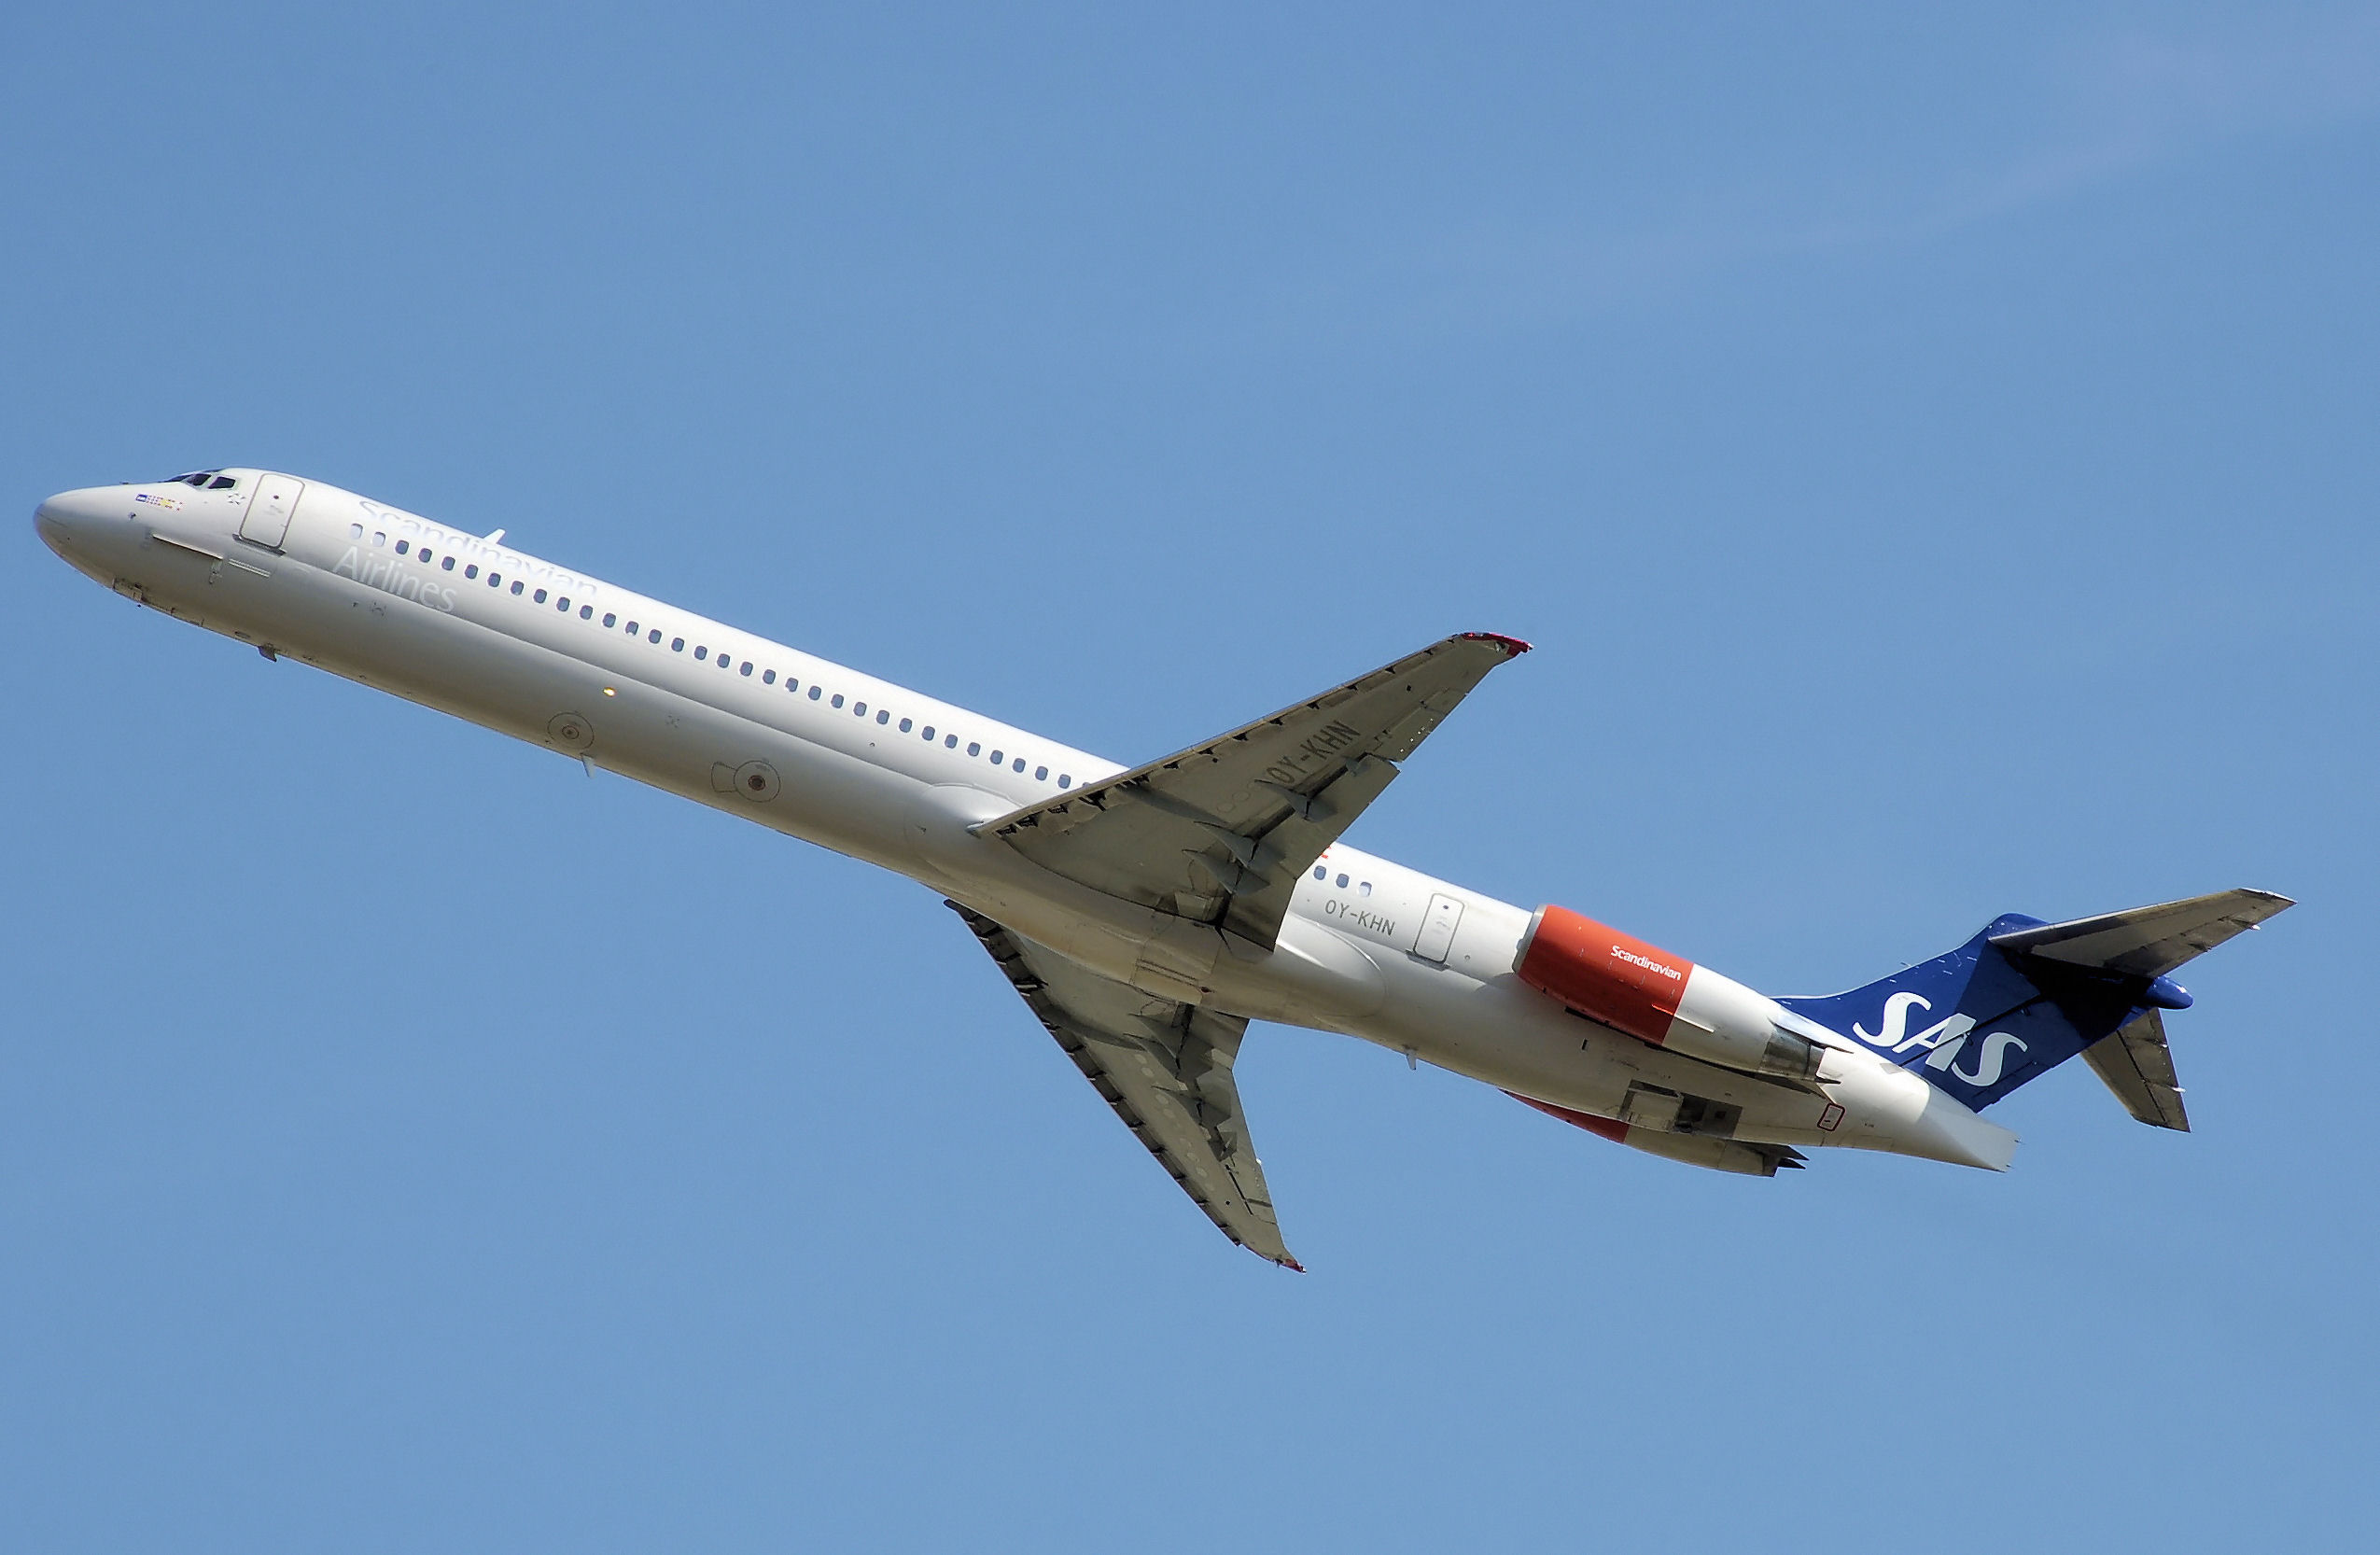 MD-80s FINAL EXAM